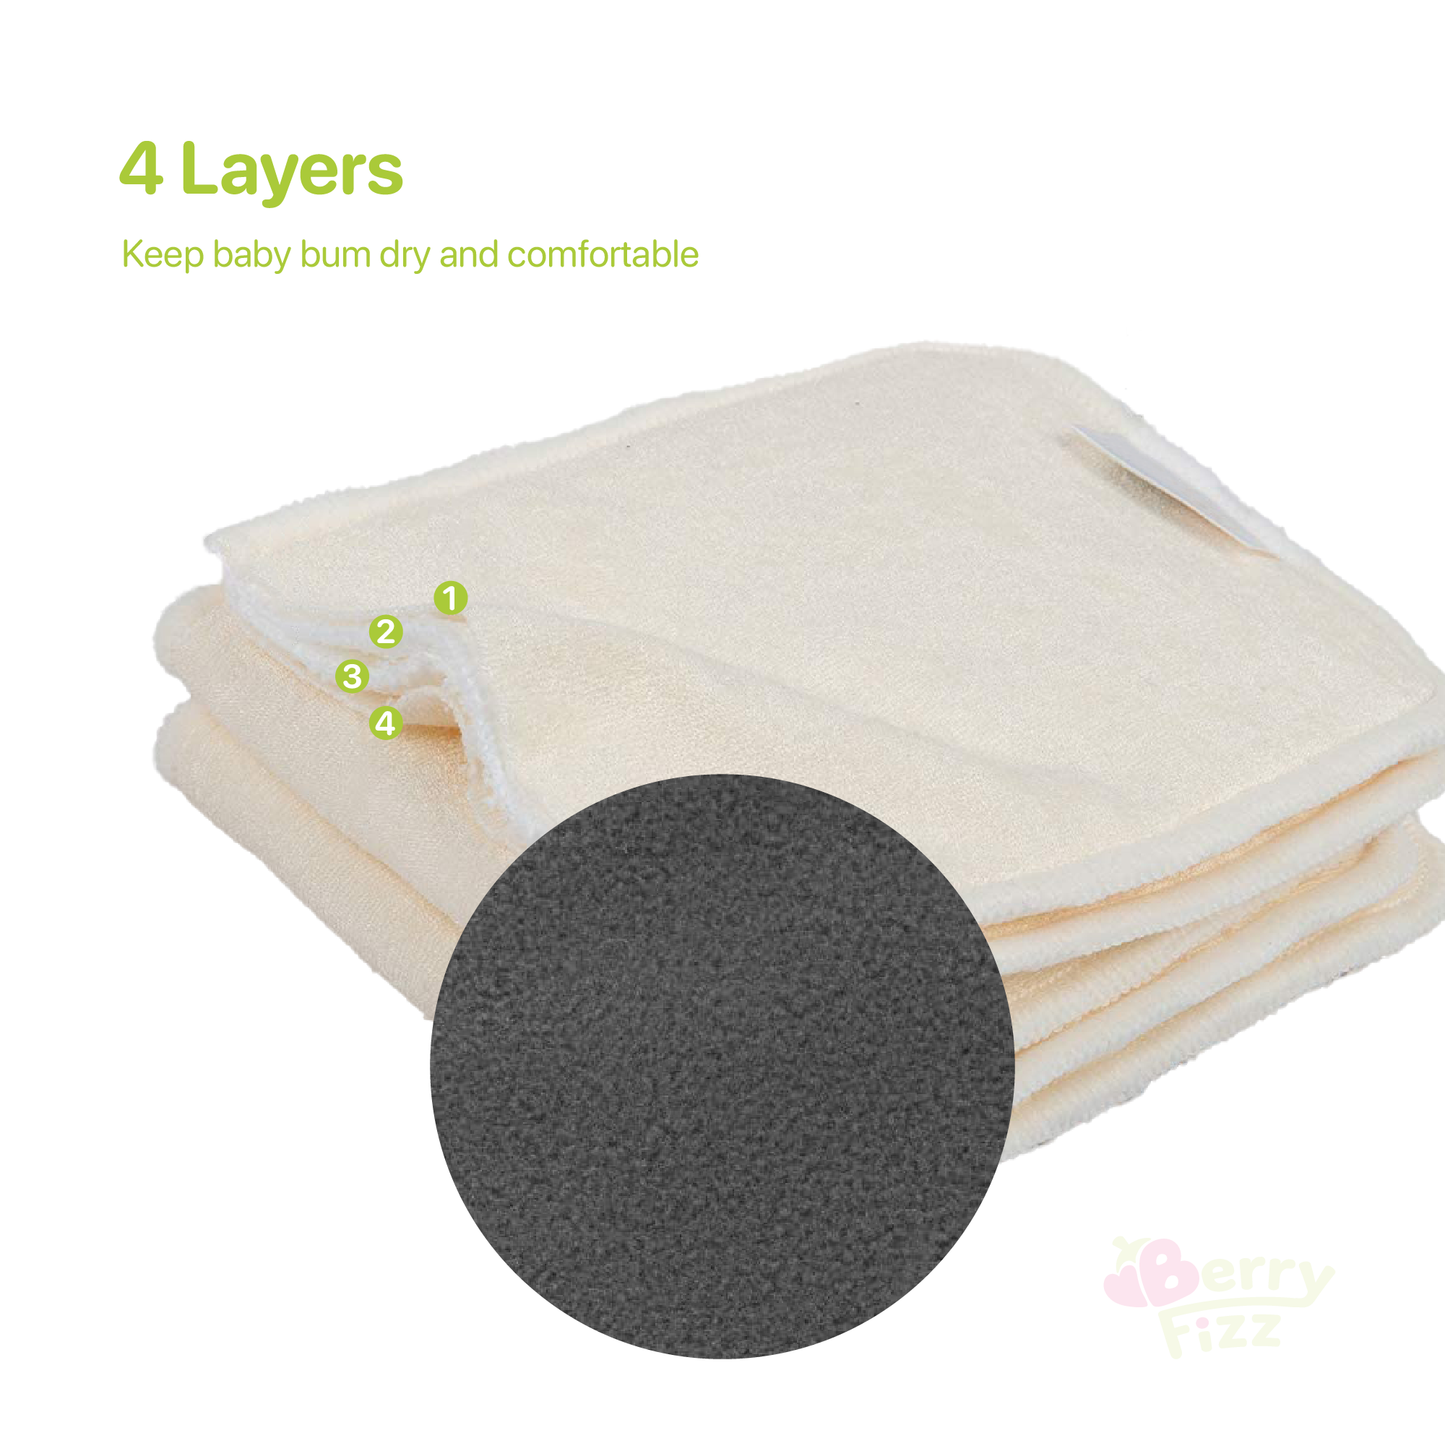 10 Pack Cloth Baby Diaper Inserts Liner 4 Layers Bamboo Microfiber Reusable Super Absorbent for Newborn